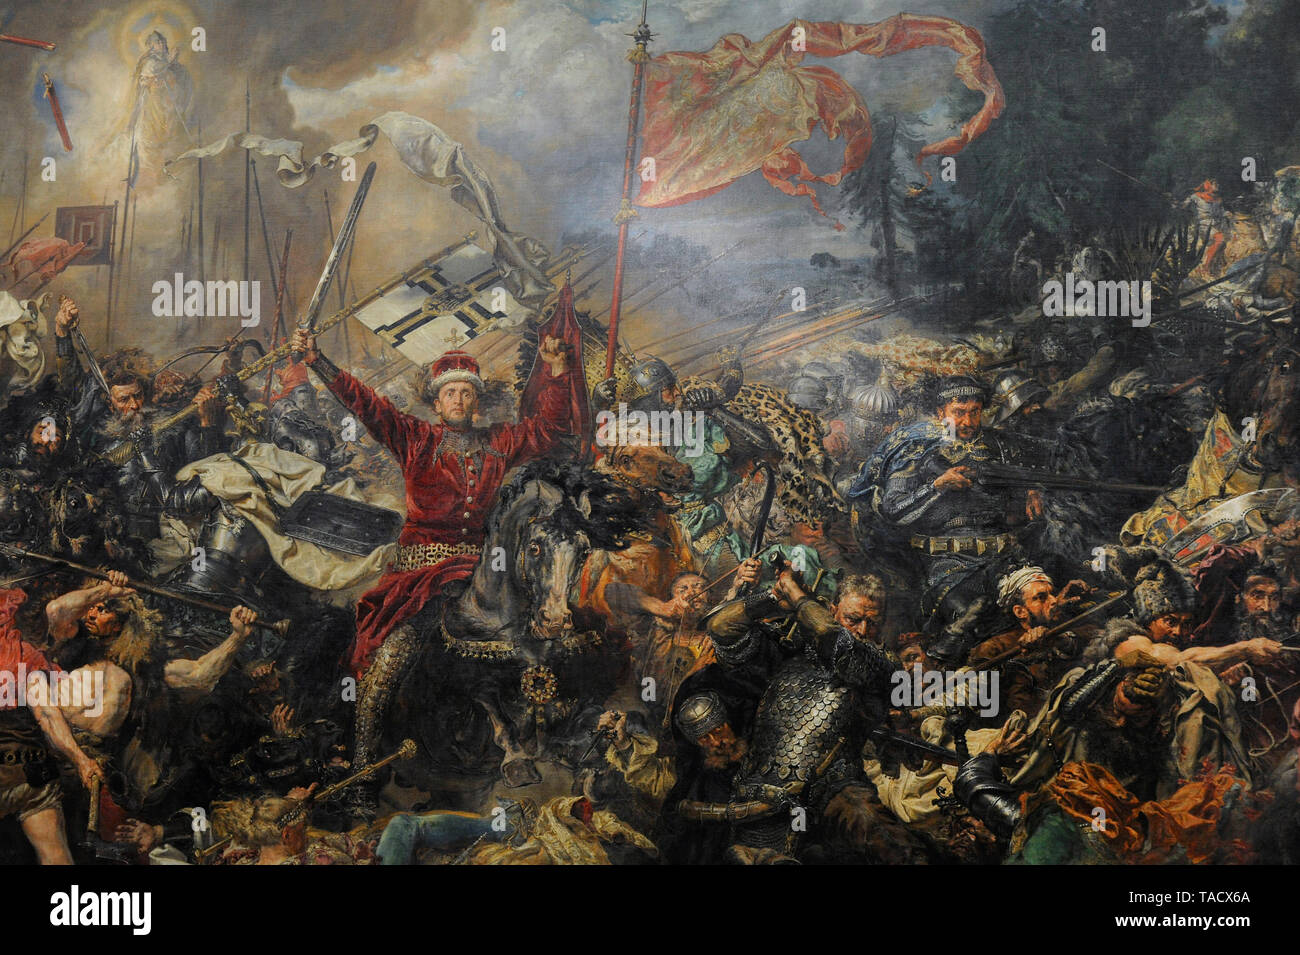 Polish-Lithuanian-Teutonic War (1409-1411). Conflict between Kingdom of Poland and Grand Duchy of Lithuania against the Teutonic Knights. Painting depicting the Battle of Grunwald (Tannenberg) (15 July, 1410), 1878, by Jan Matejko (1838-1893). Detail, Vytautas the Great (1350-1430) Grand Duke of Lithuania. National Museum. Warsaw. Poland. Stock Photo